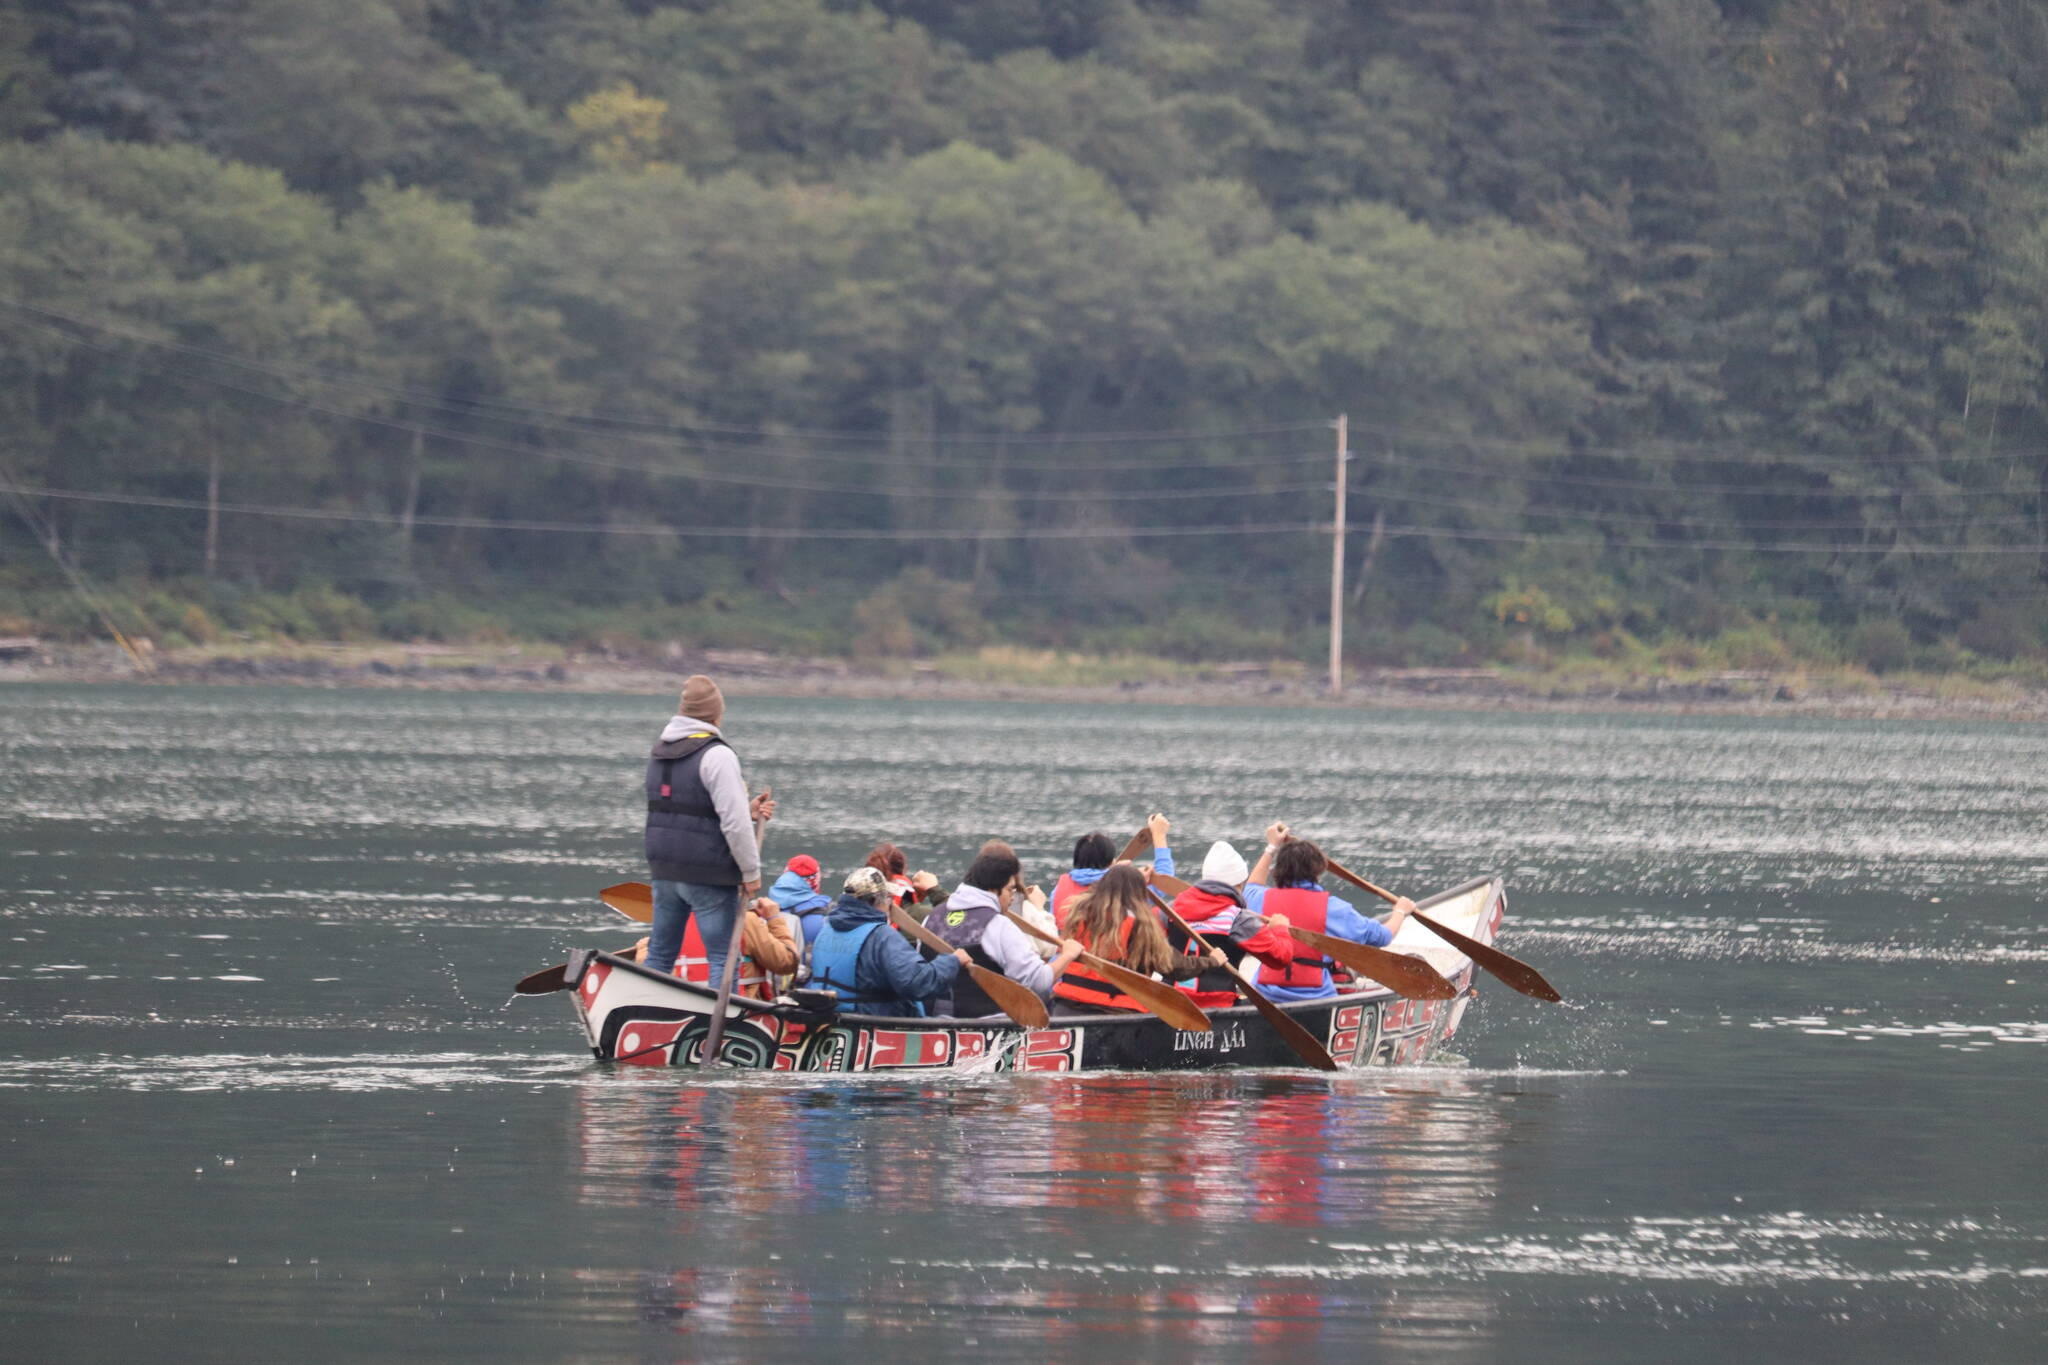 The healing canoe rides offered on Saturday, Sept. 10 were reserved for suicide lost and attempt survivors and were offered by One People Canoe Society. (Jonson Kuhn / Juneau Empire)